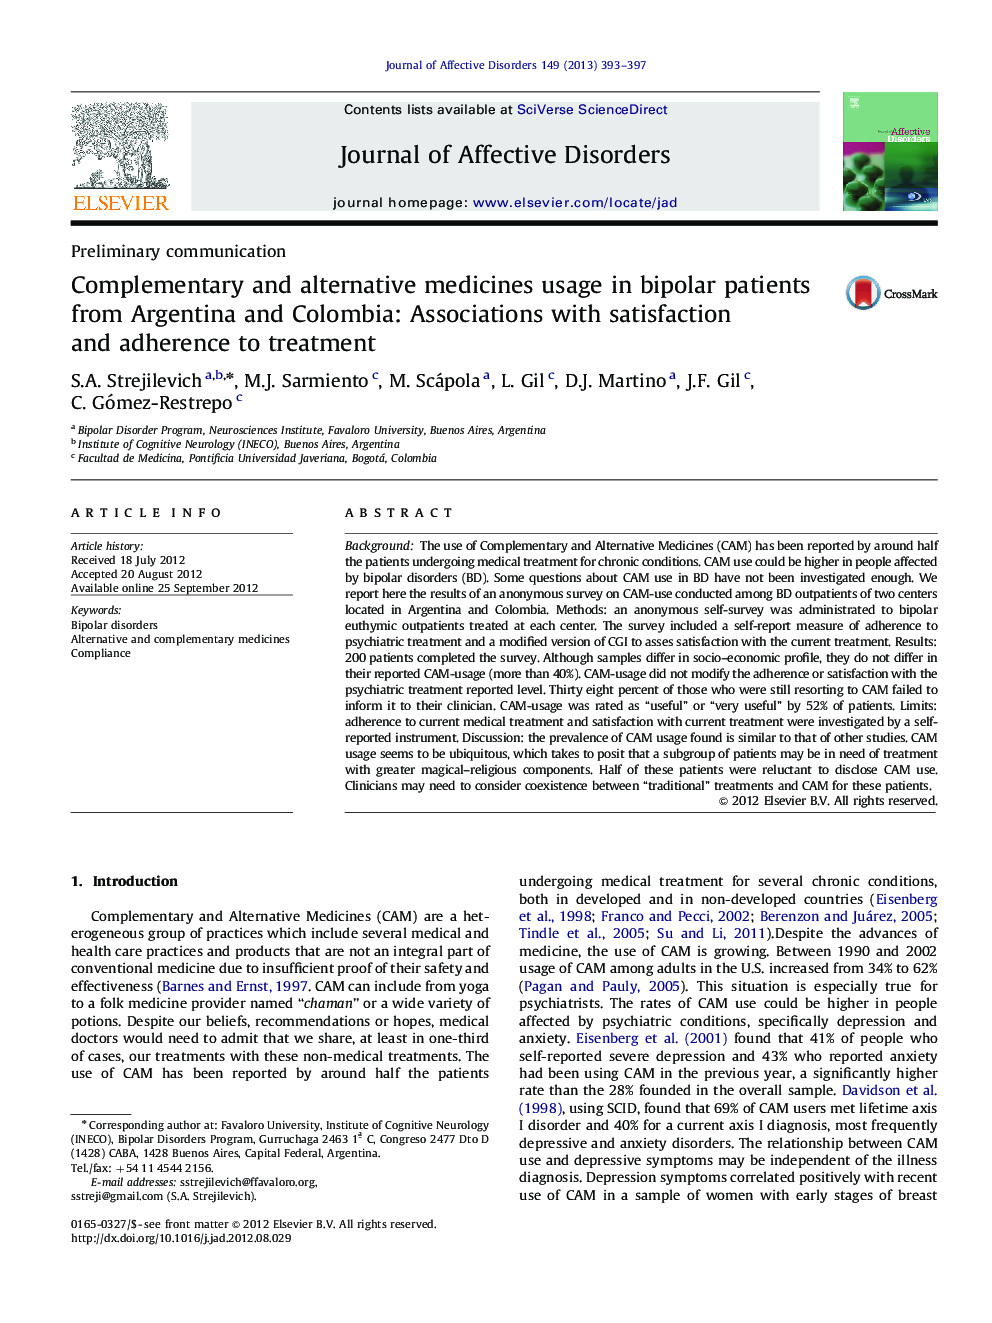 Complementary and alternative medicines usage in bipolar patients from Argentina and Colombia: Associations with satisfaction and adherence to treatment